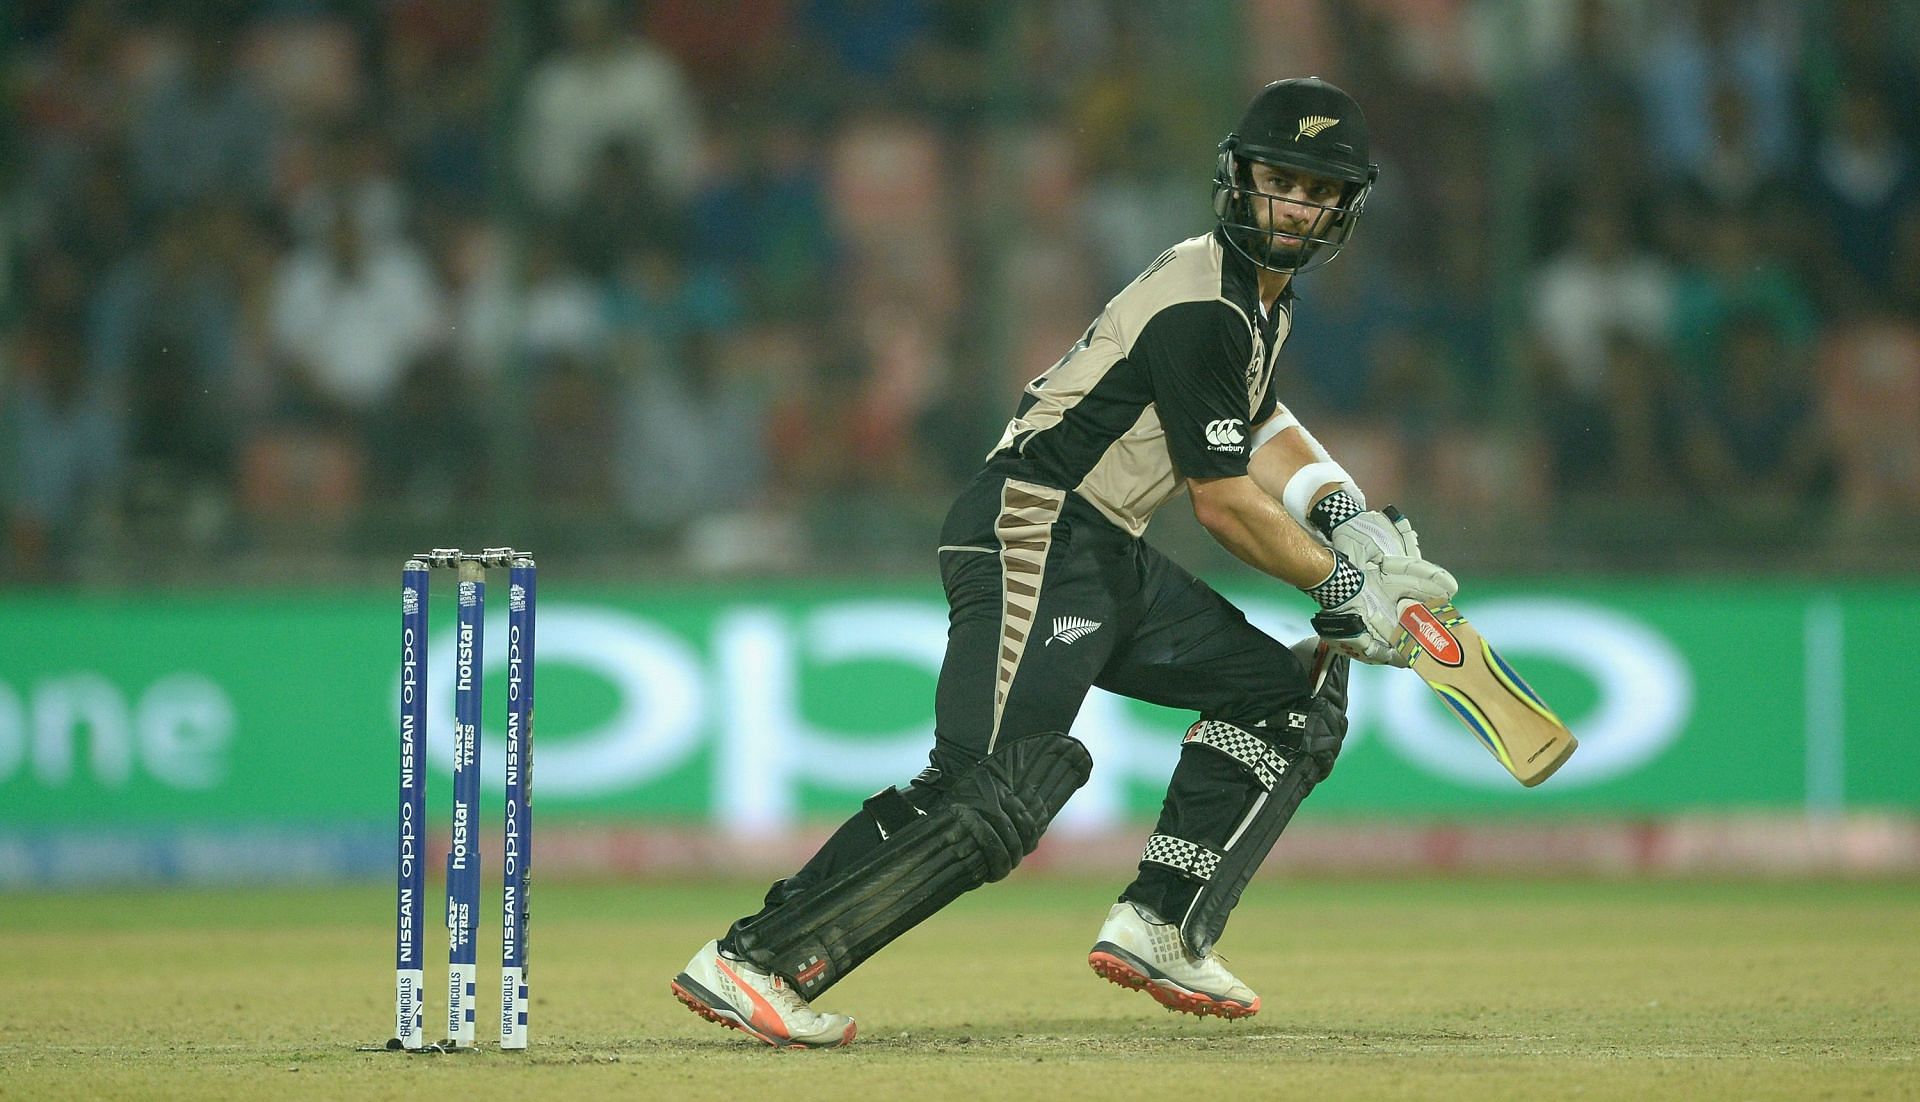 Kane Williamson played expertly on a tricky pitch